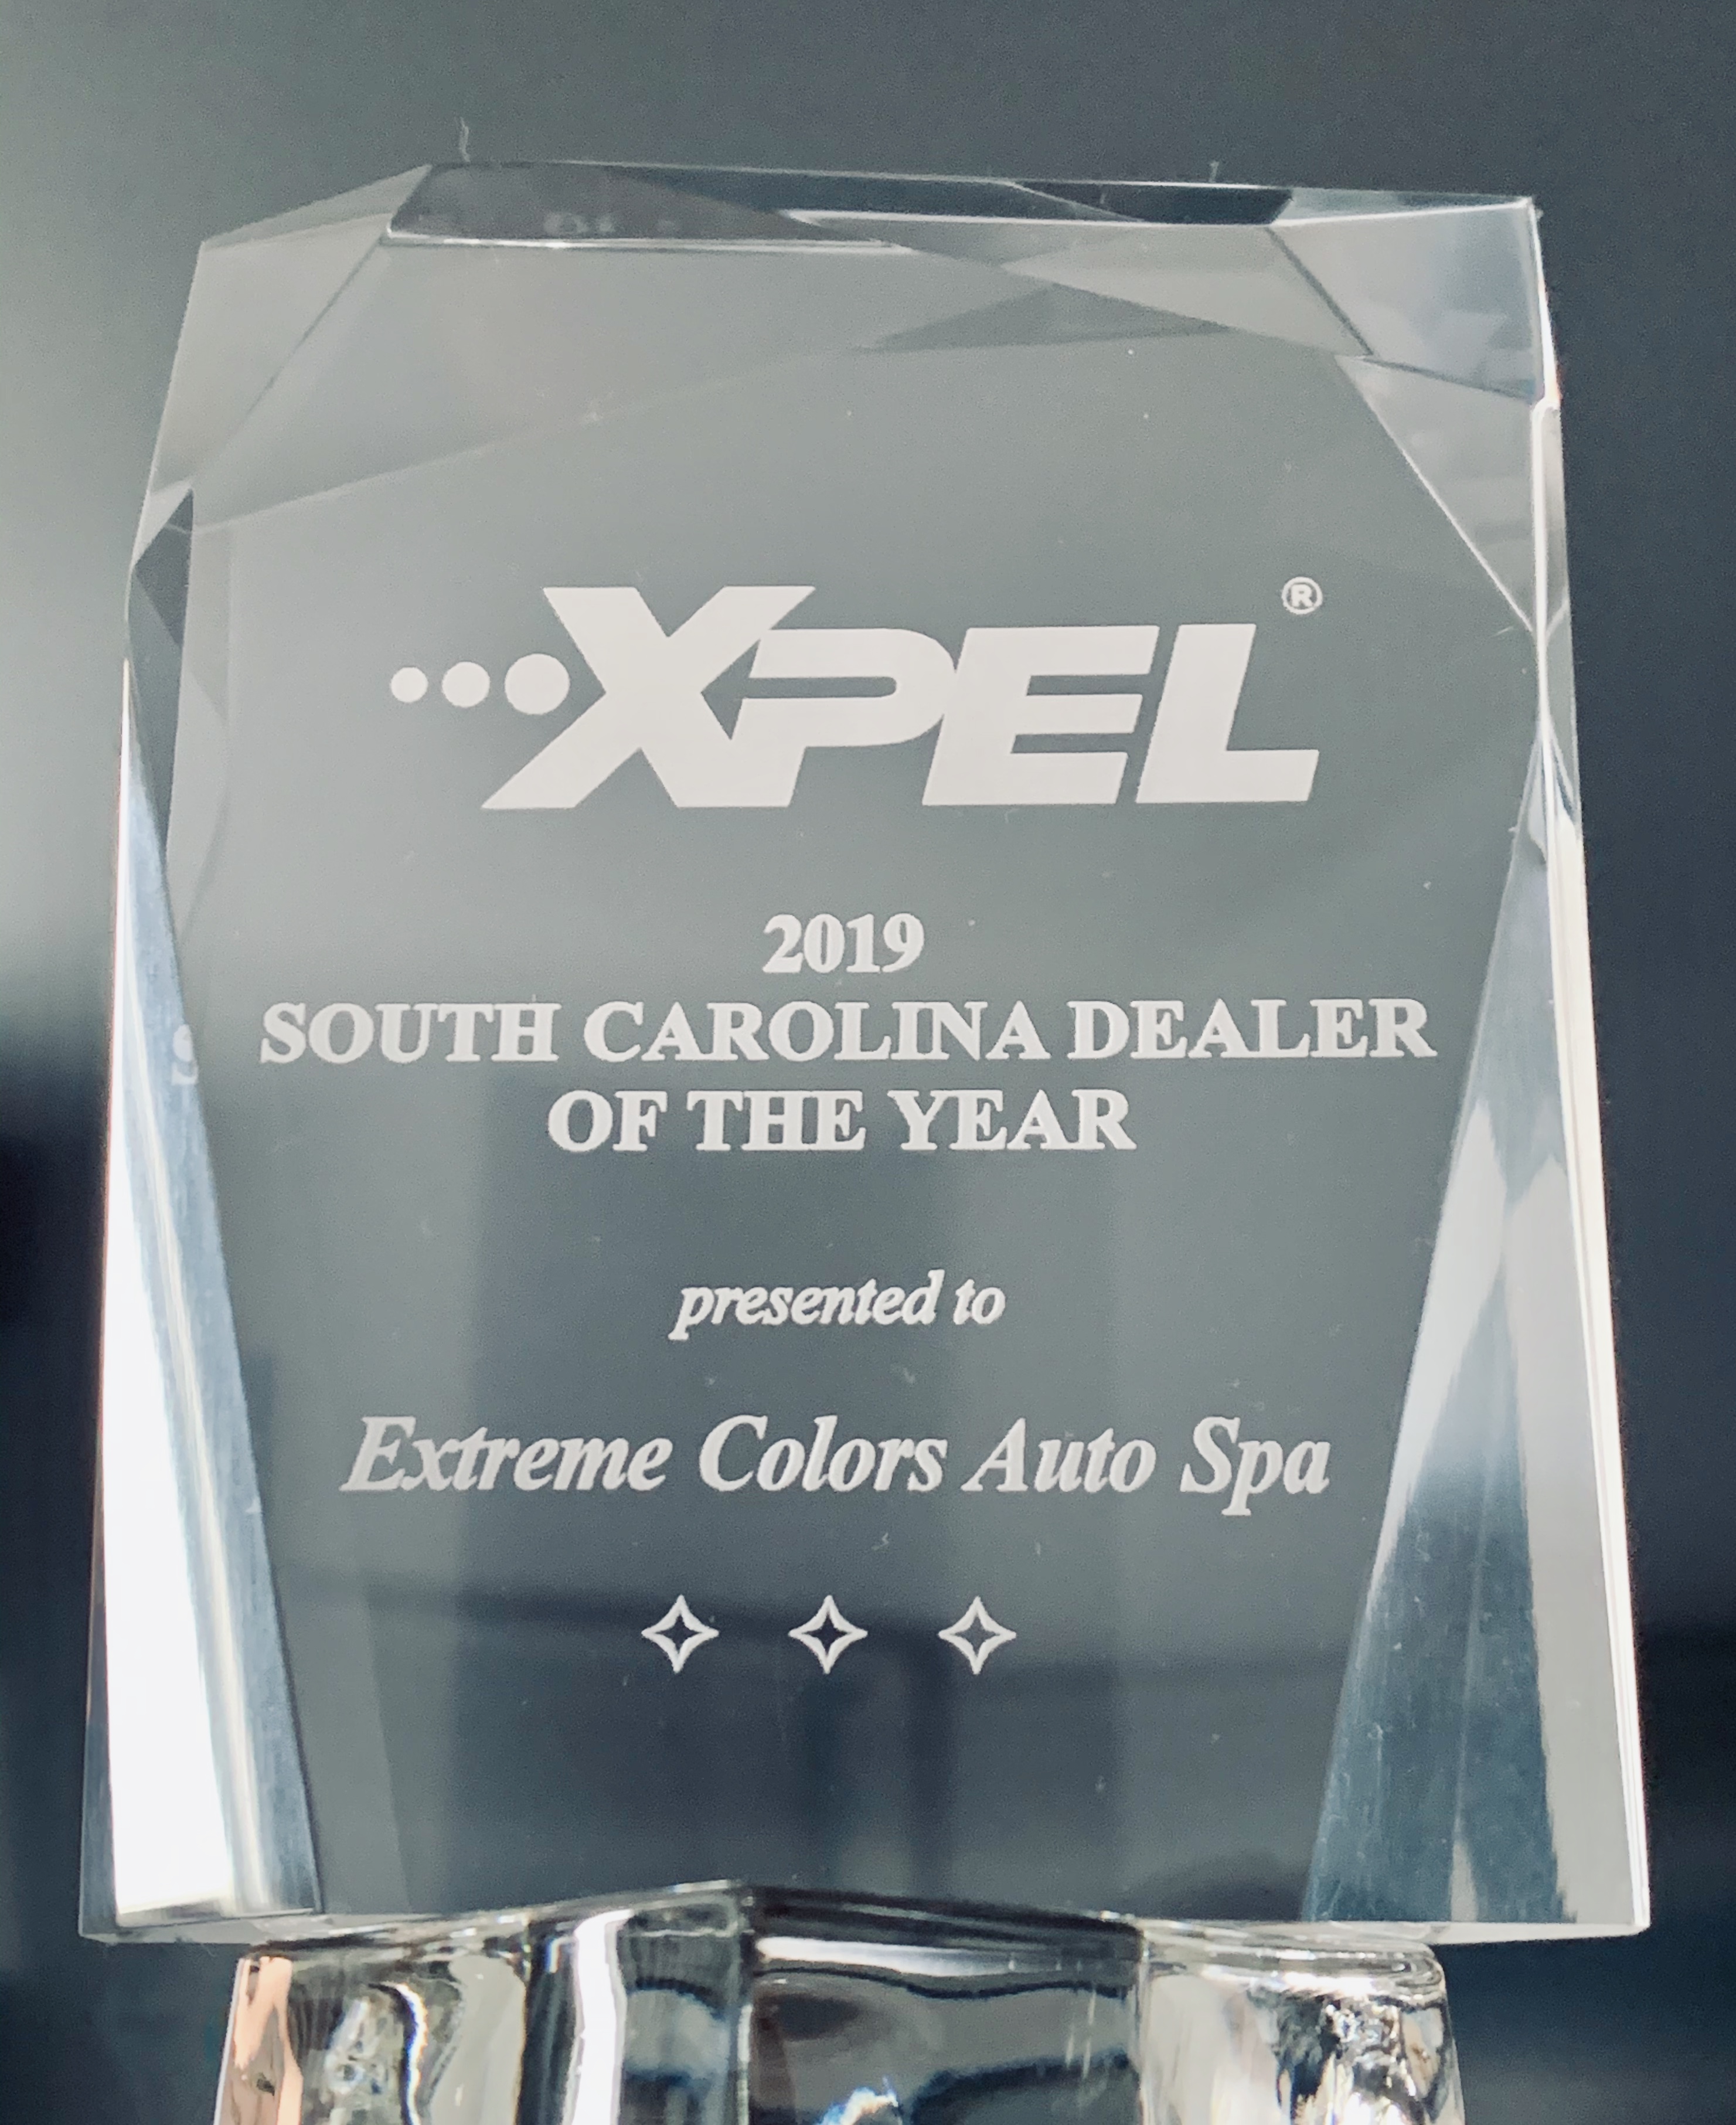 Extreme Colors Auto Spa Awarded SC Dealer of the Year by XPEL